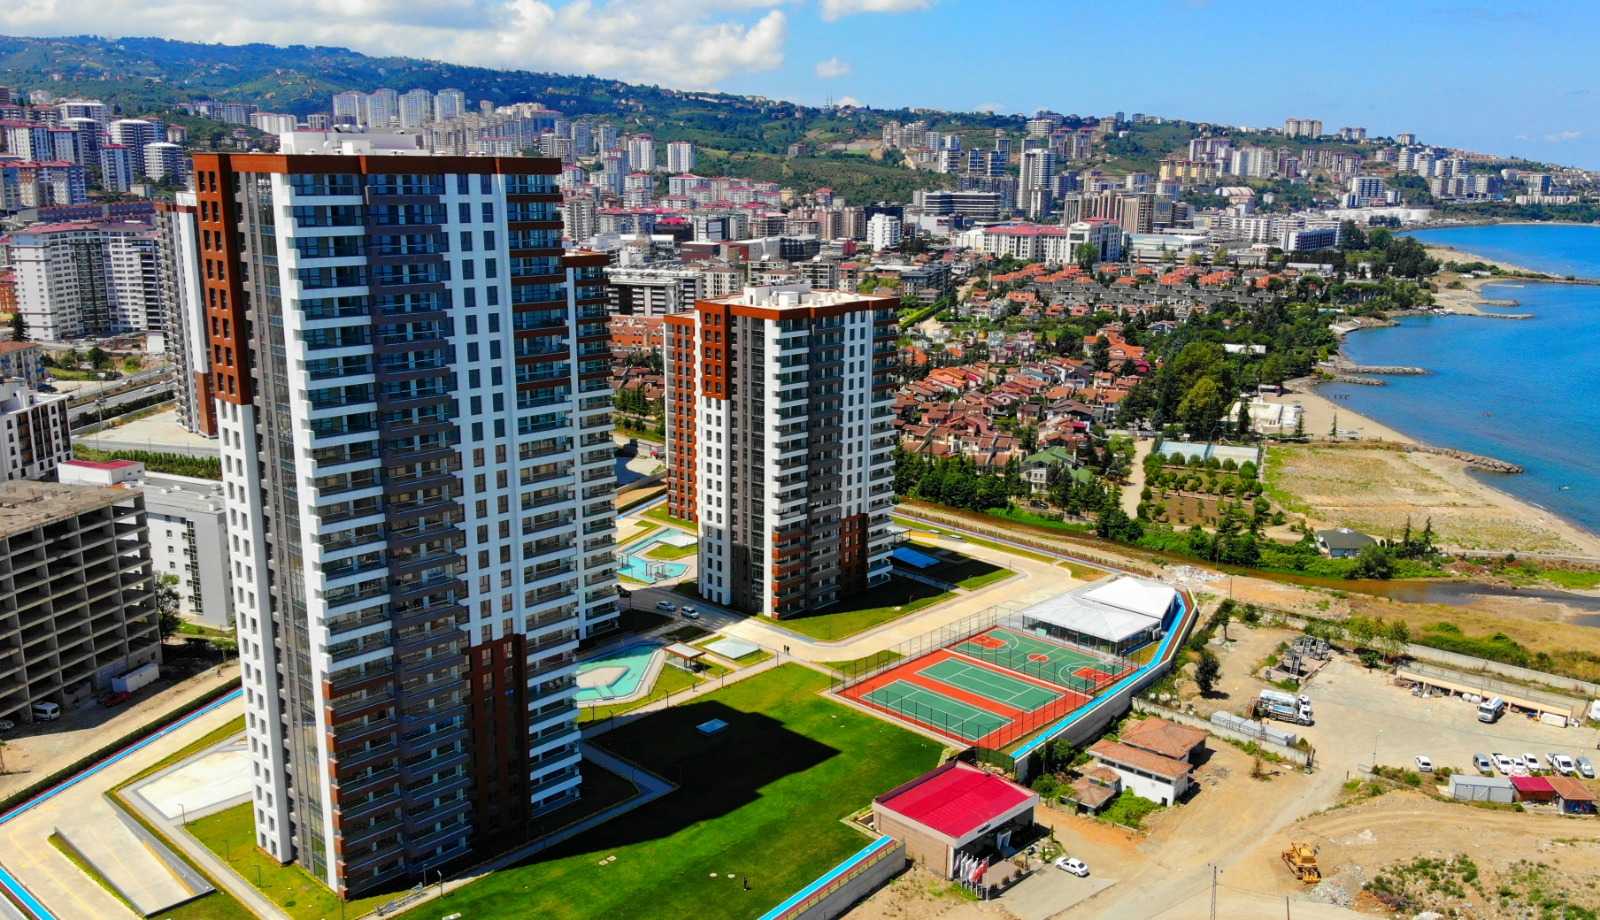 Trabzon Sea Front Luxury Apartments - New modern complex